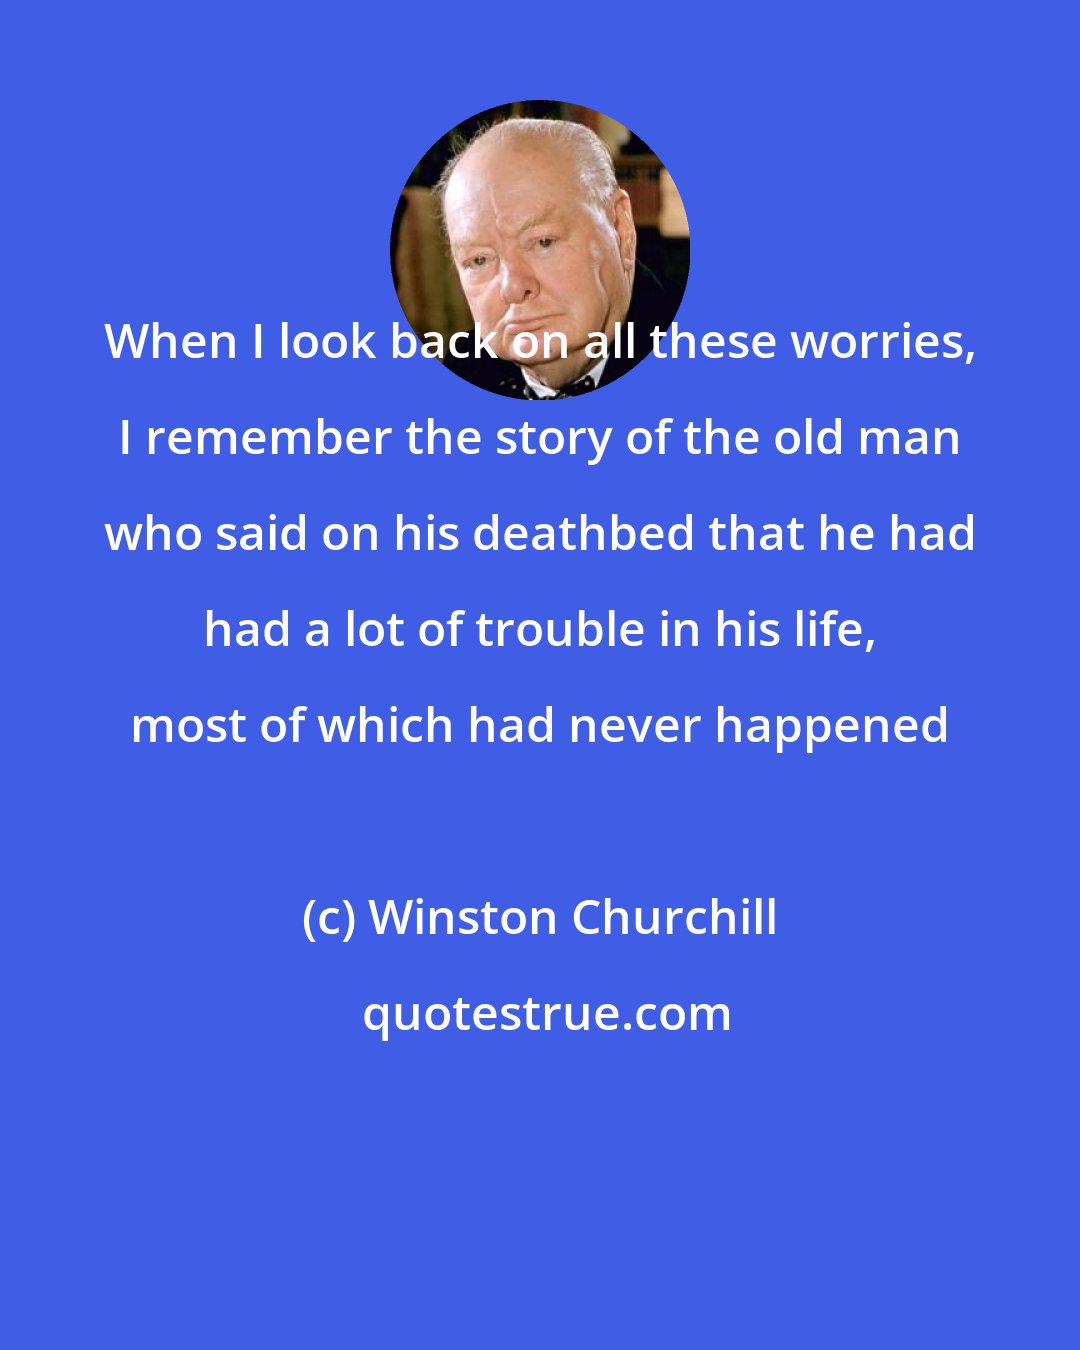 Winston Churchill: When I look back on all these worries, I remember the story of the old man who said on his deathbed that he had had a lot of trouble in his life, most of which had never happened